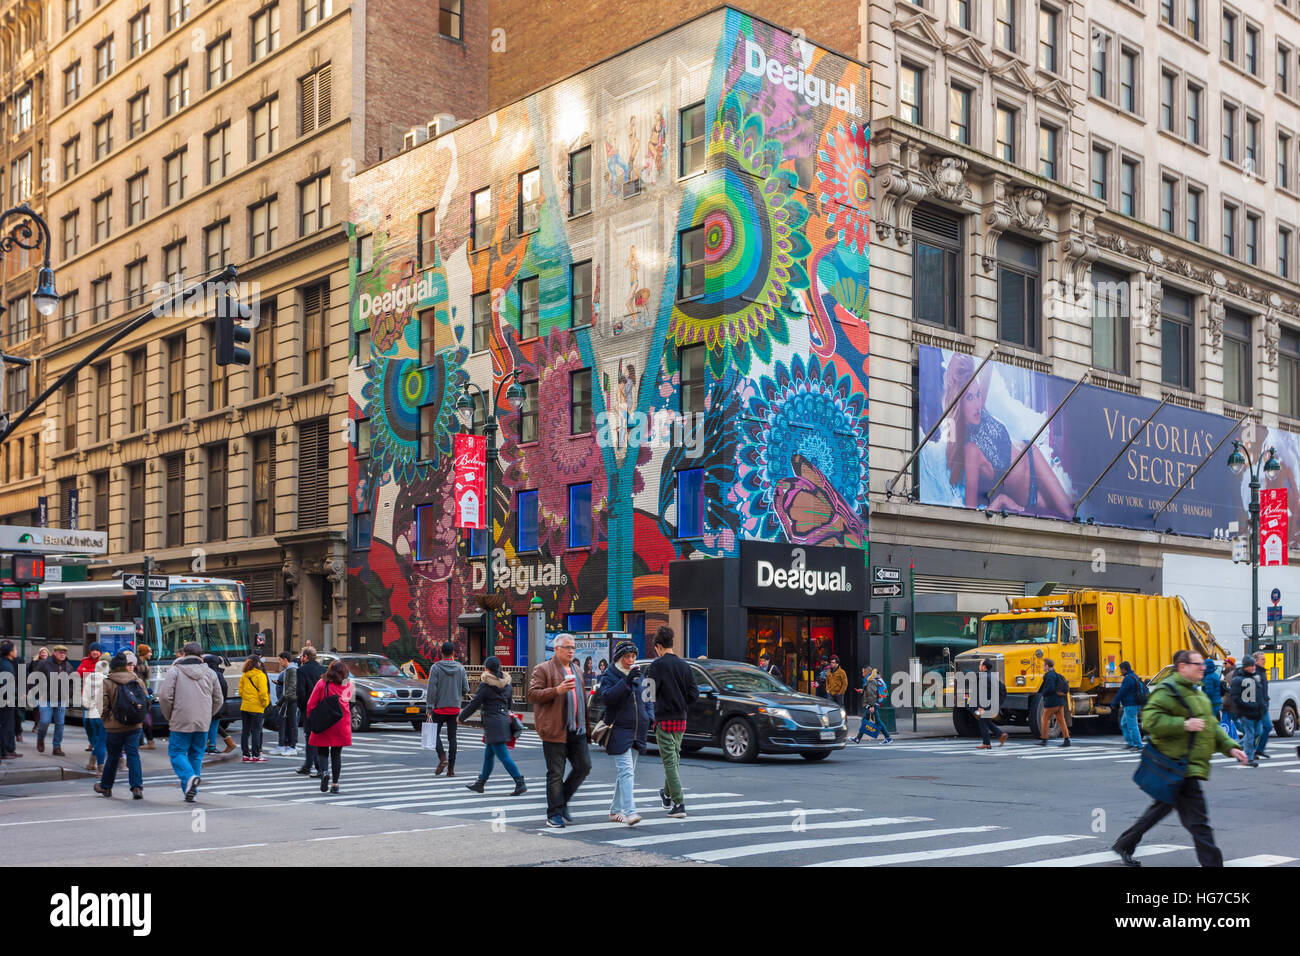 Desigual on Avenue of the Americas, (6th Ave) New York Stock Photo - Alamy